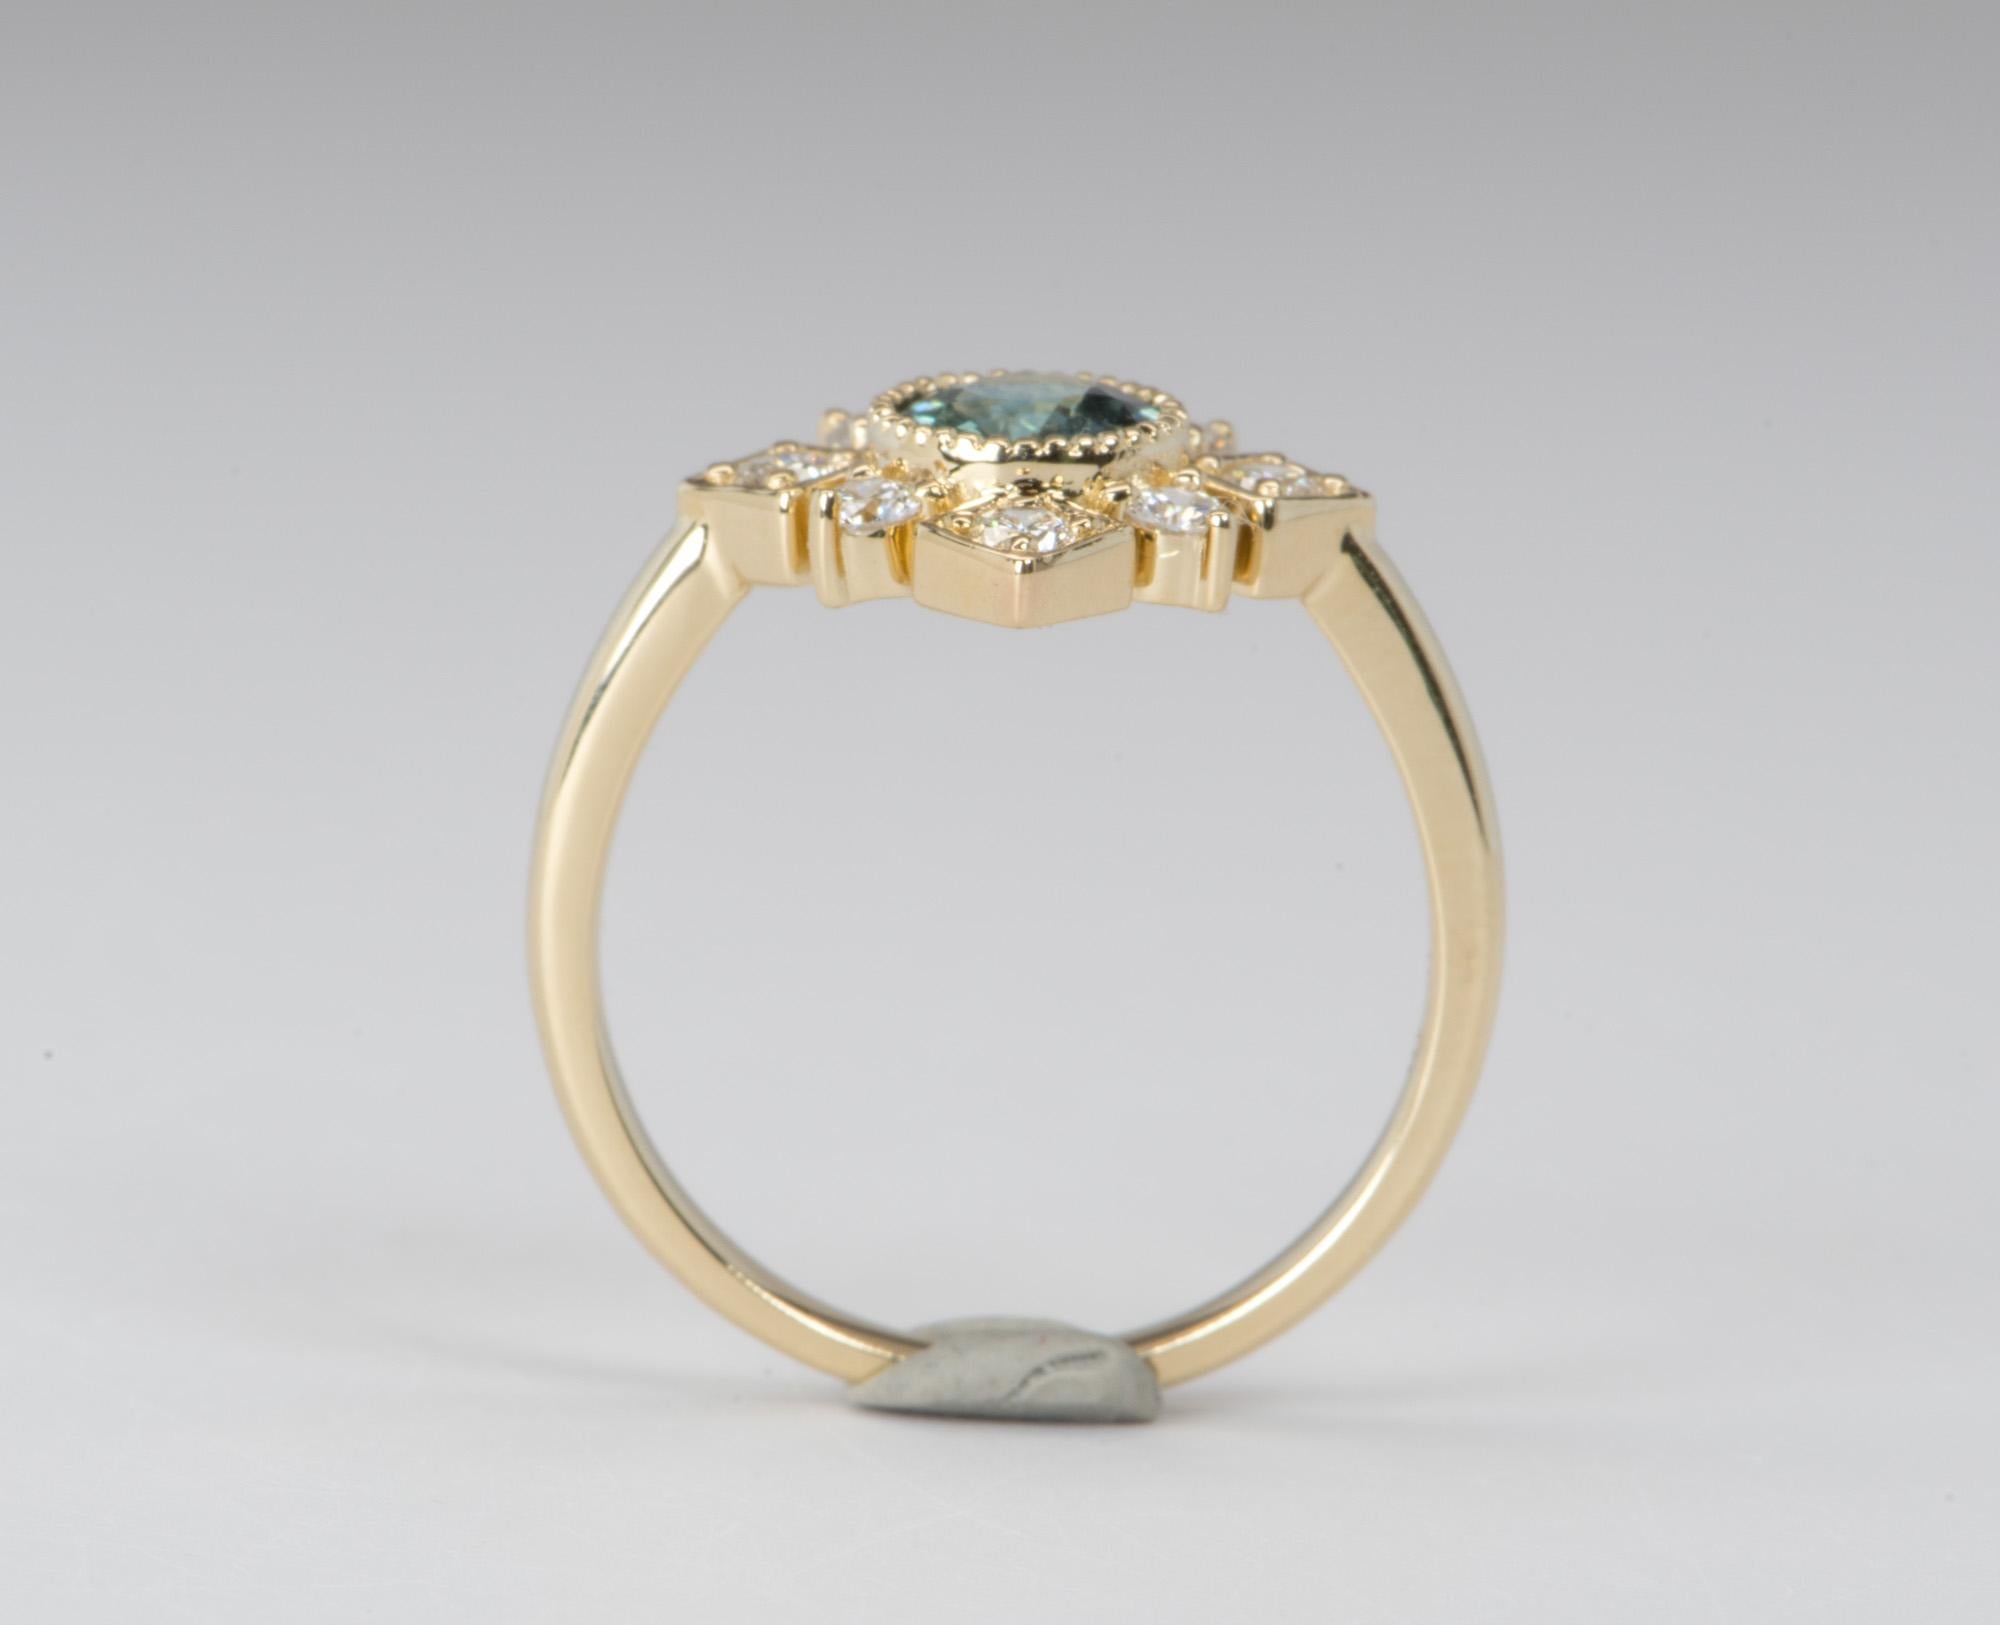 Teal Blue Montana Sapphire with Brilliant Diamond Halo 14K Gold Engagement Ring In New Condition For Sale In Osprey, FL